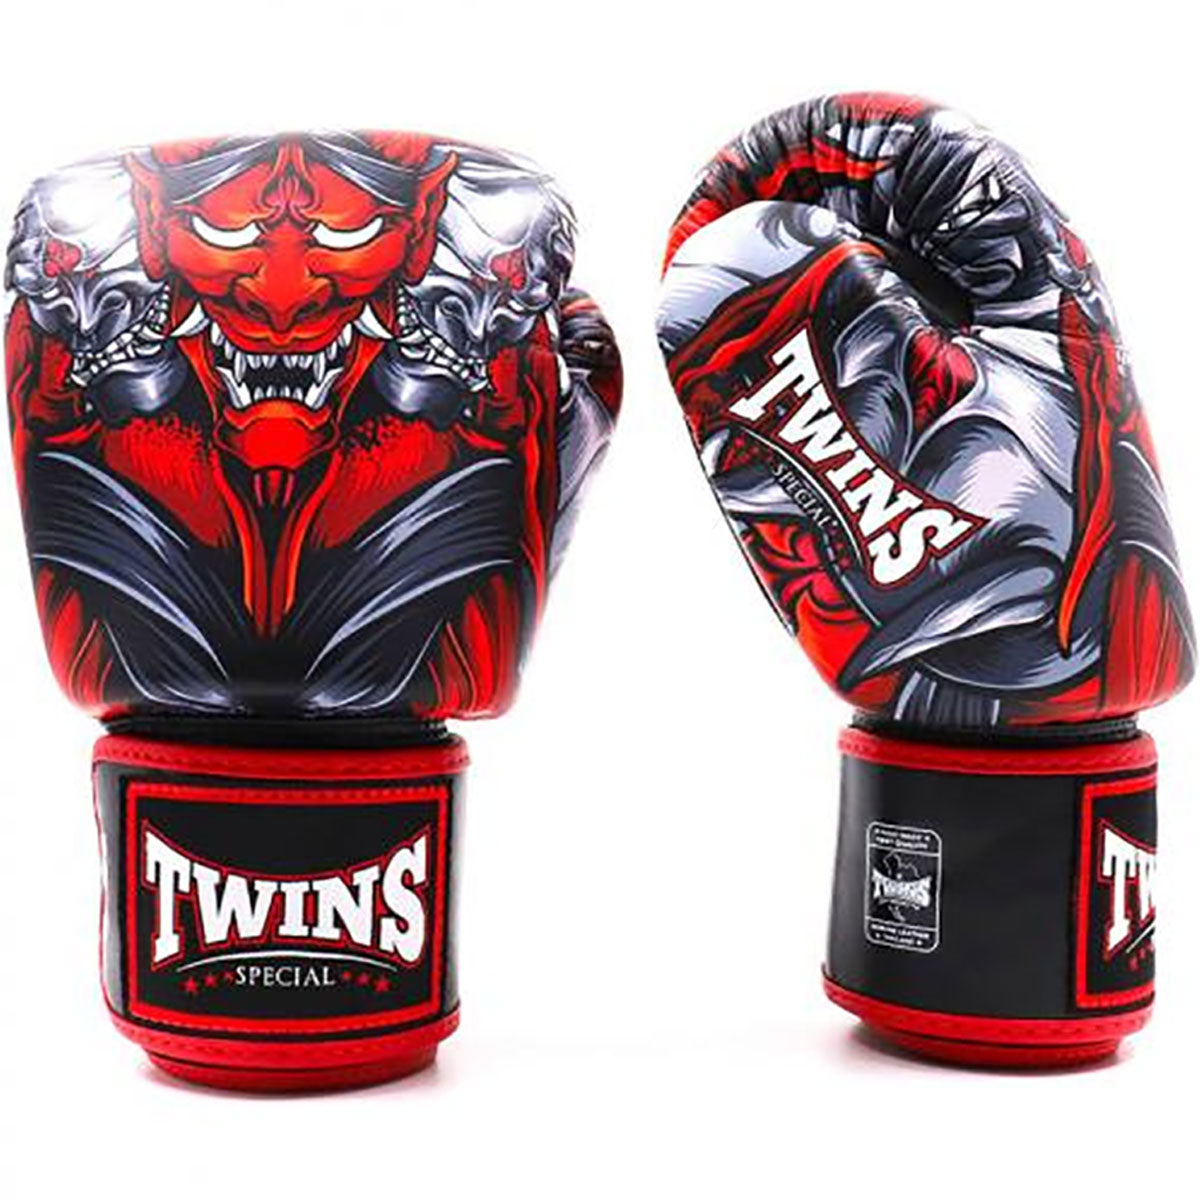 CLETO REYES OXFORD GREY/SILVER HERO DOUBLE LOOP BOXING GLOVES